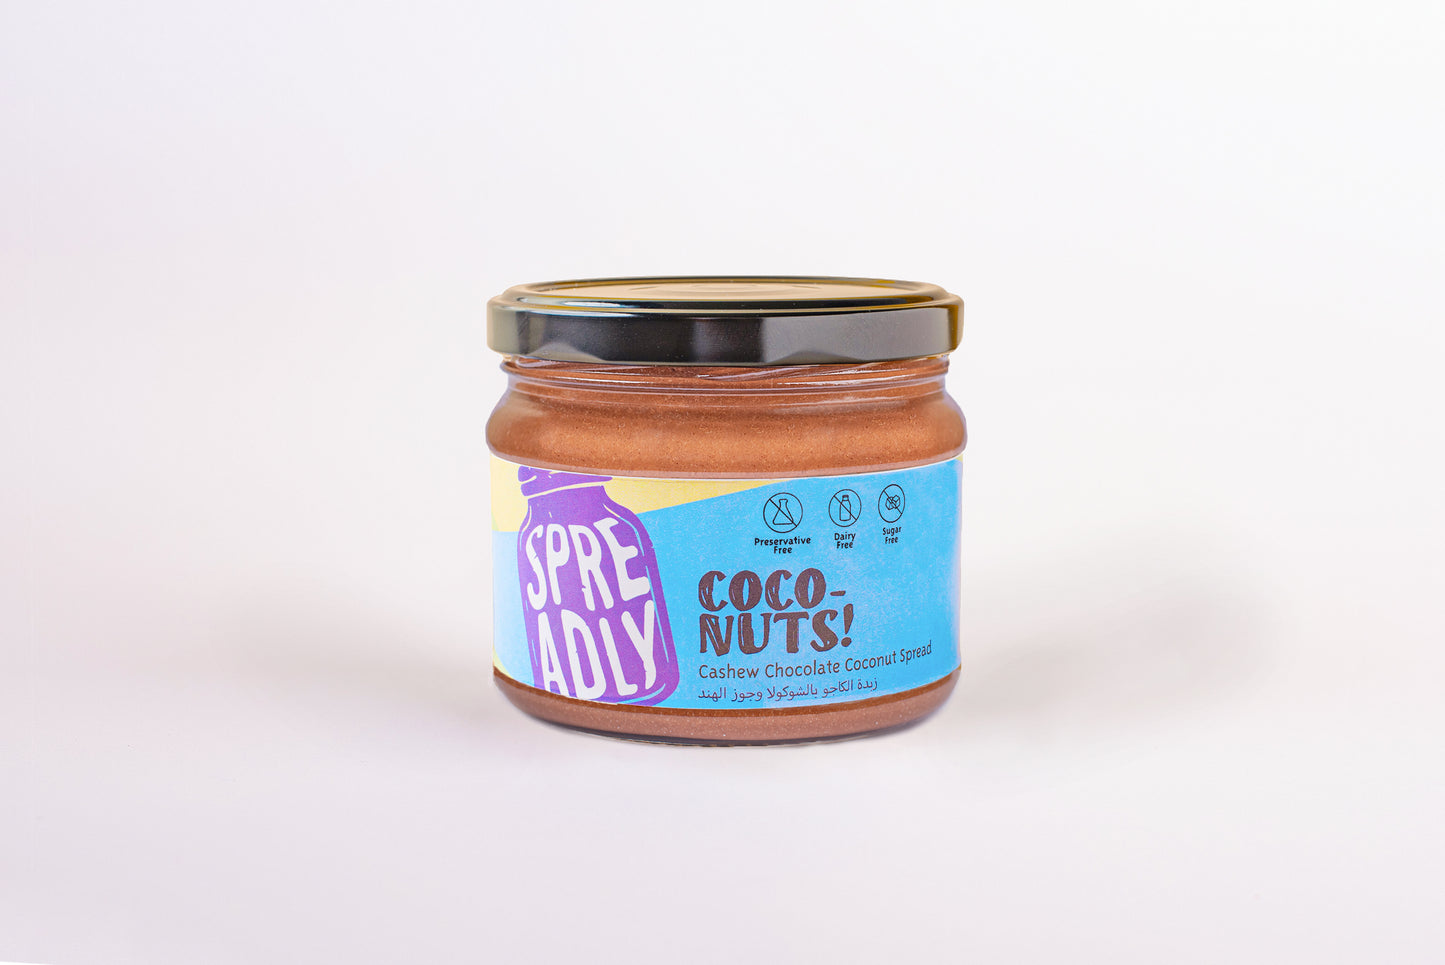 Healthy Chocolate Spread Rich in ry Roasted Cashews, with dairy free dark chocolate and coconut shreds ! FREE OF PRESERVATIVES, OIL AND DAIRY. 